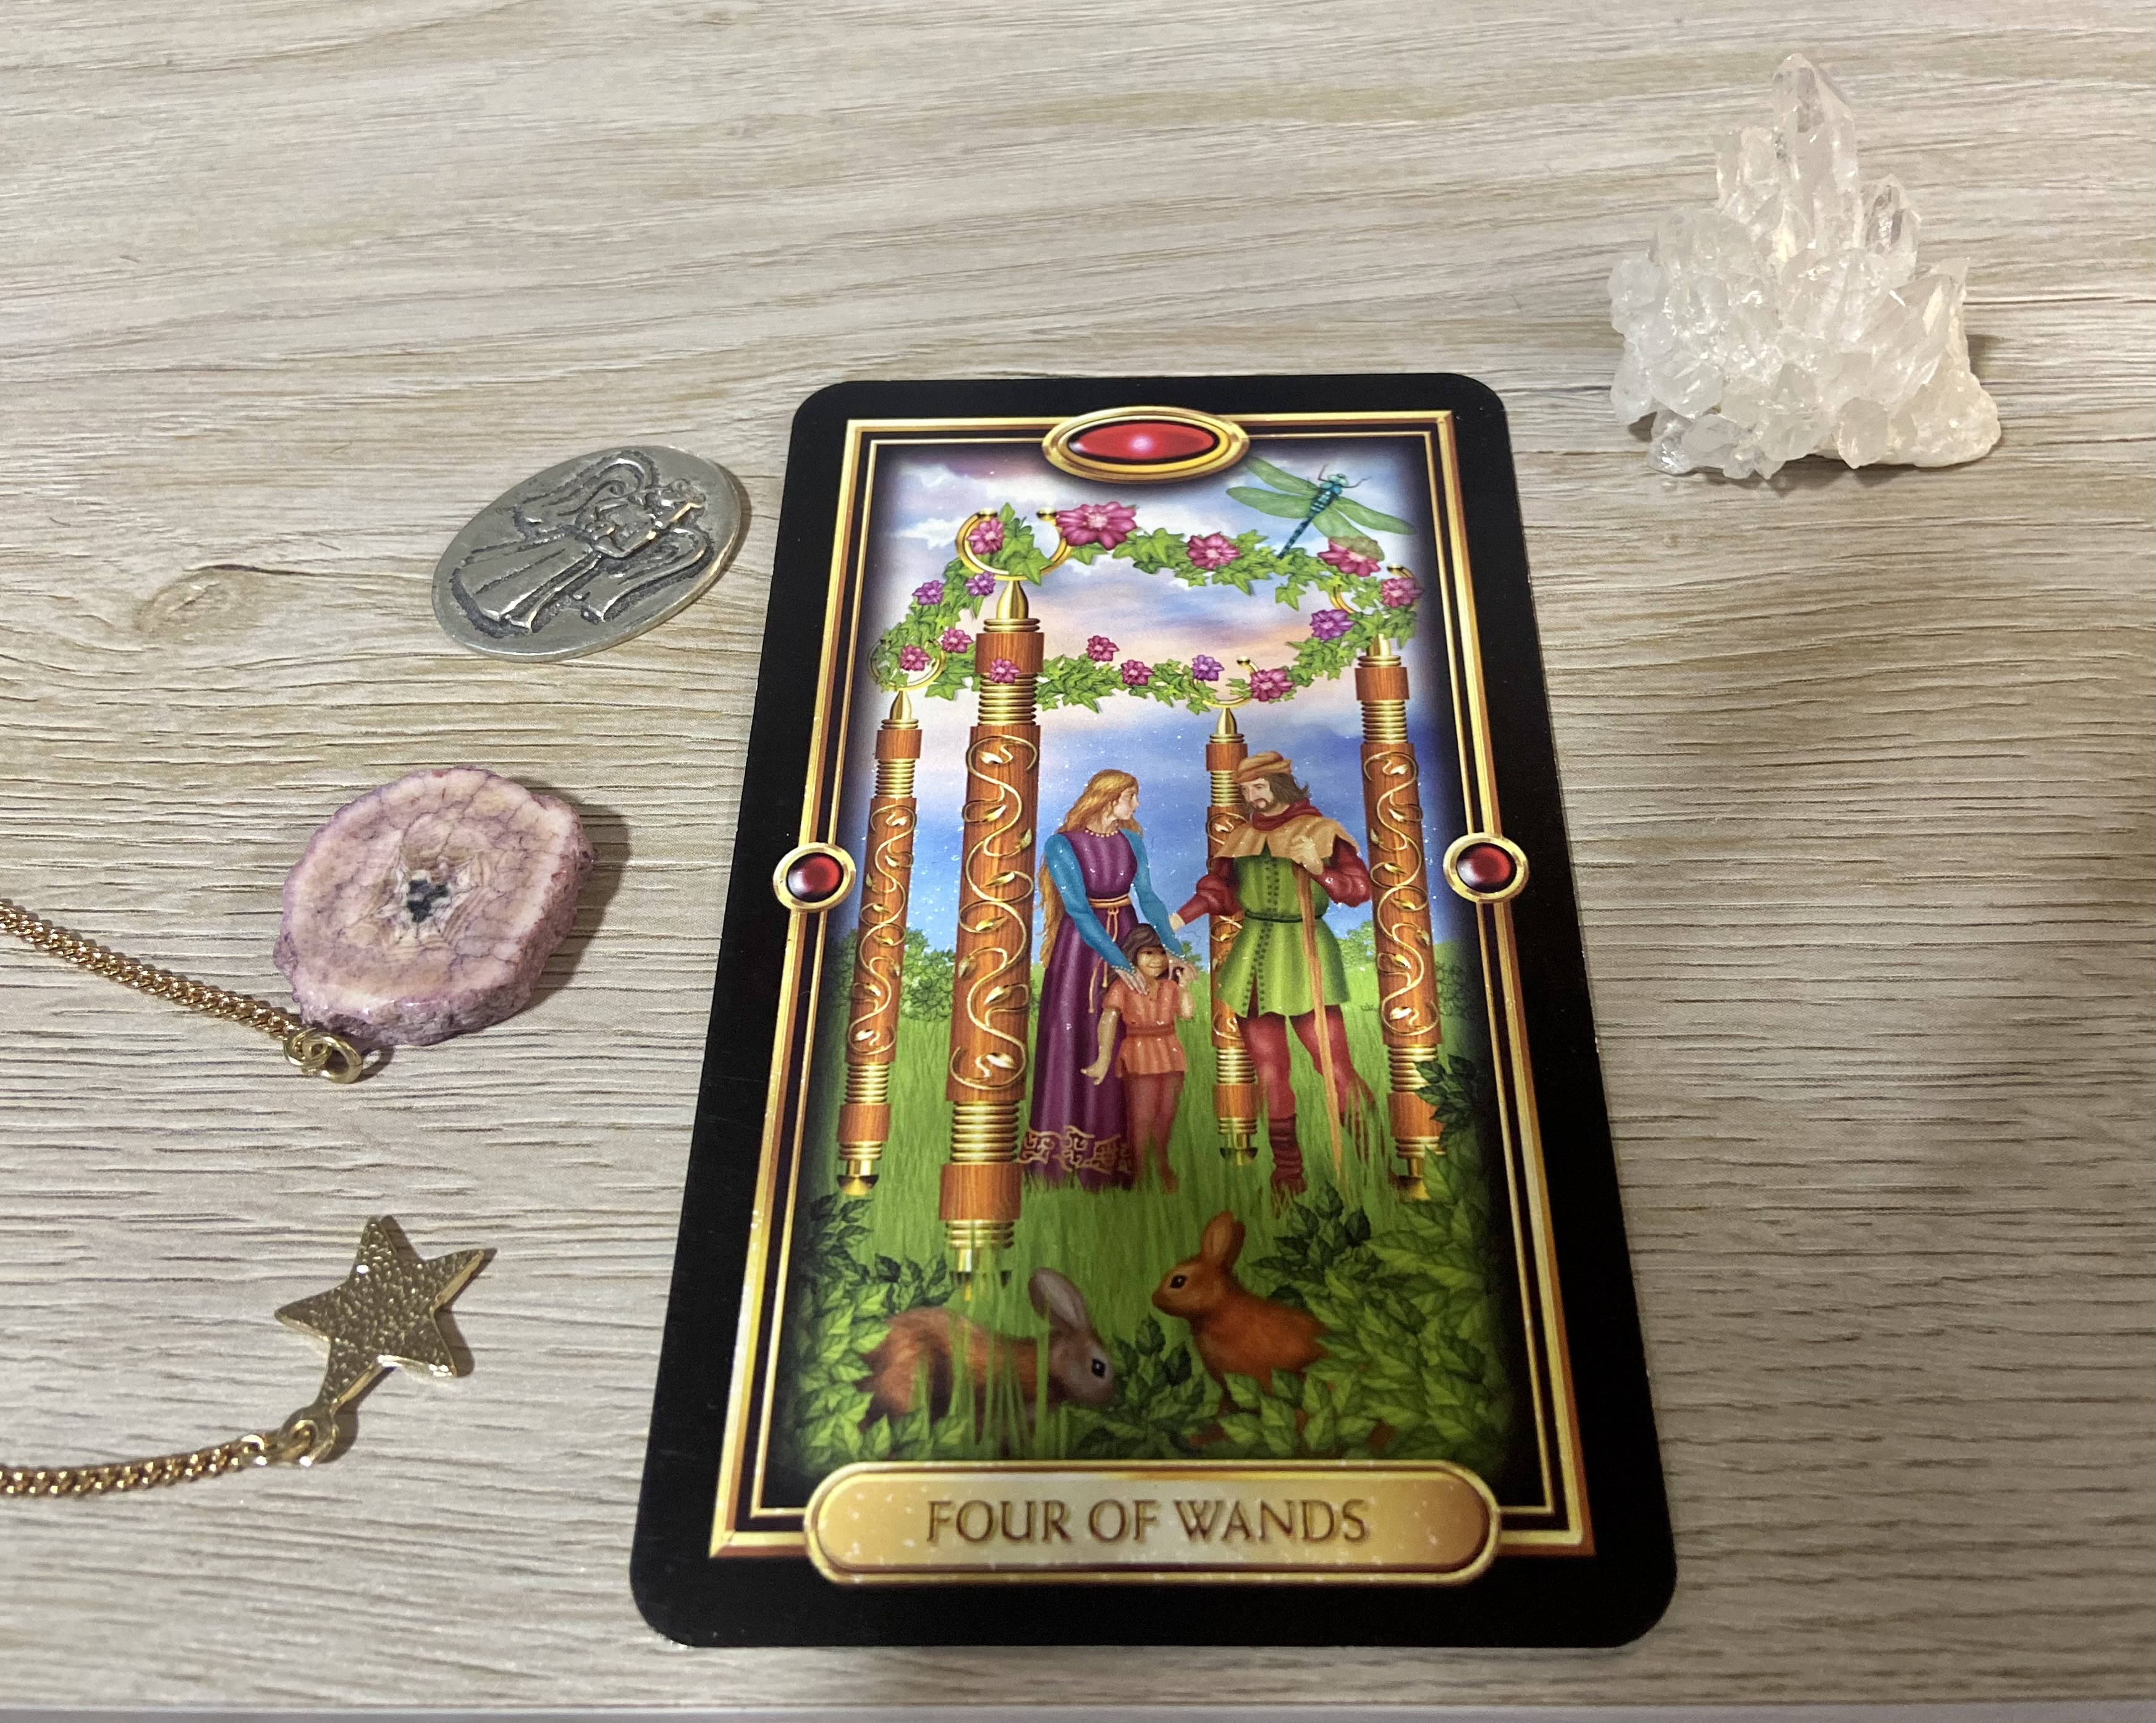 4 of wands marriage